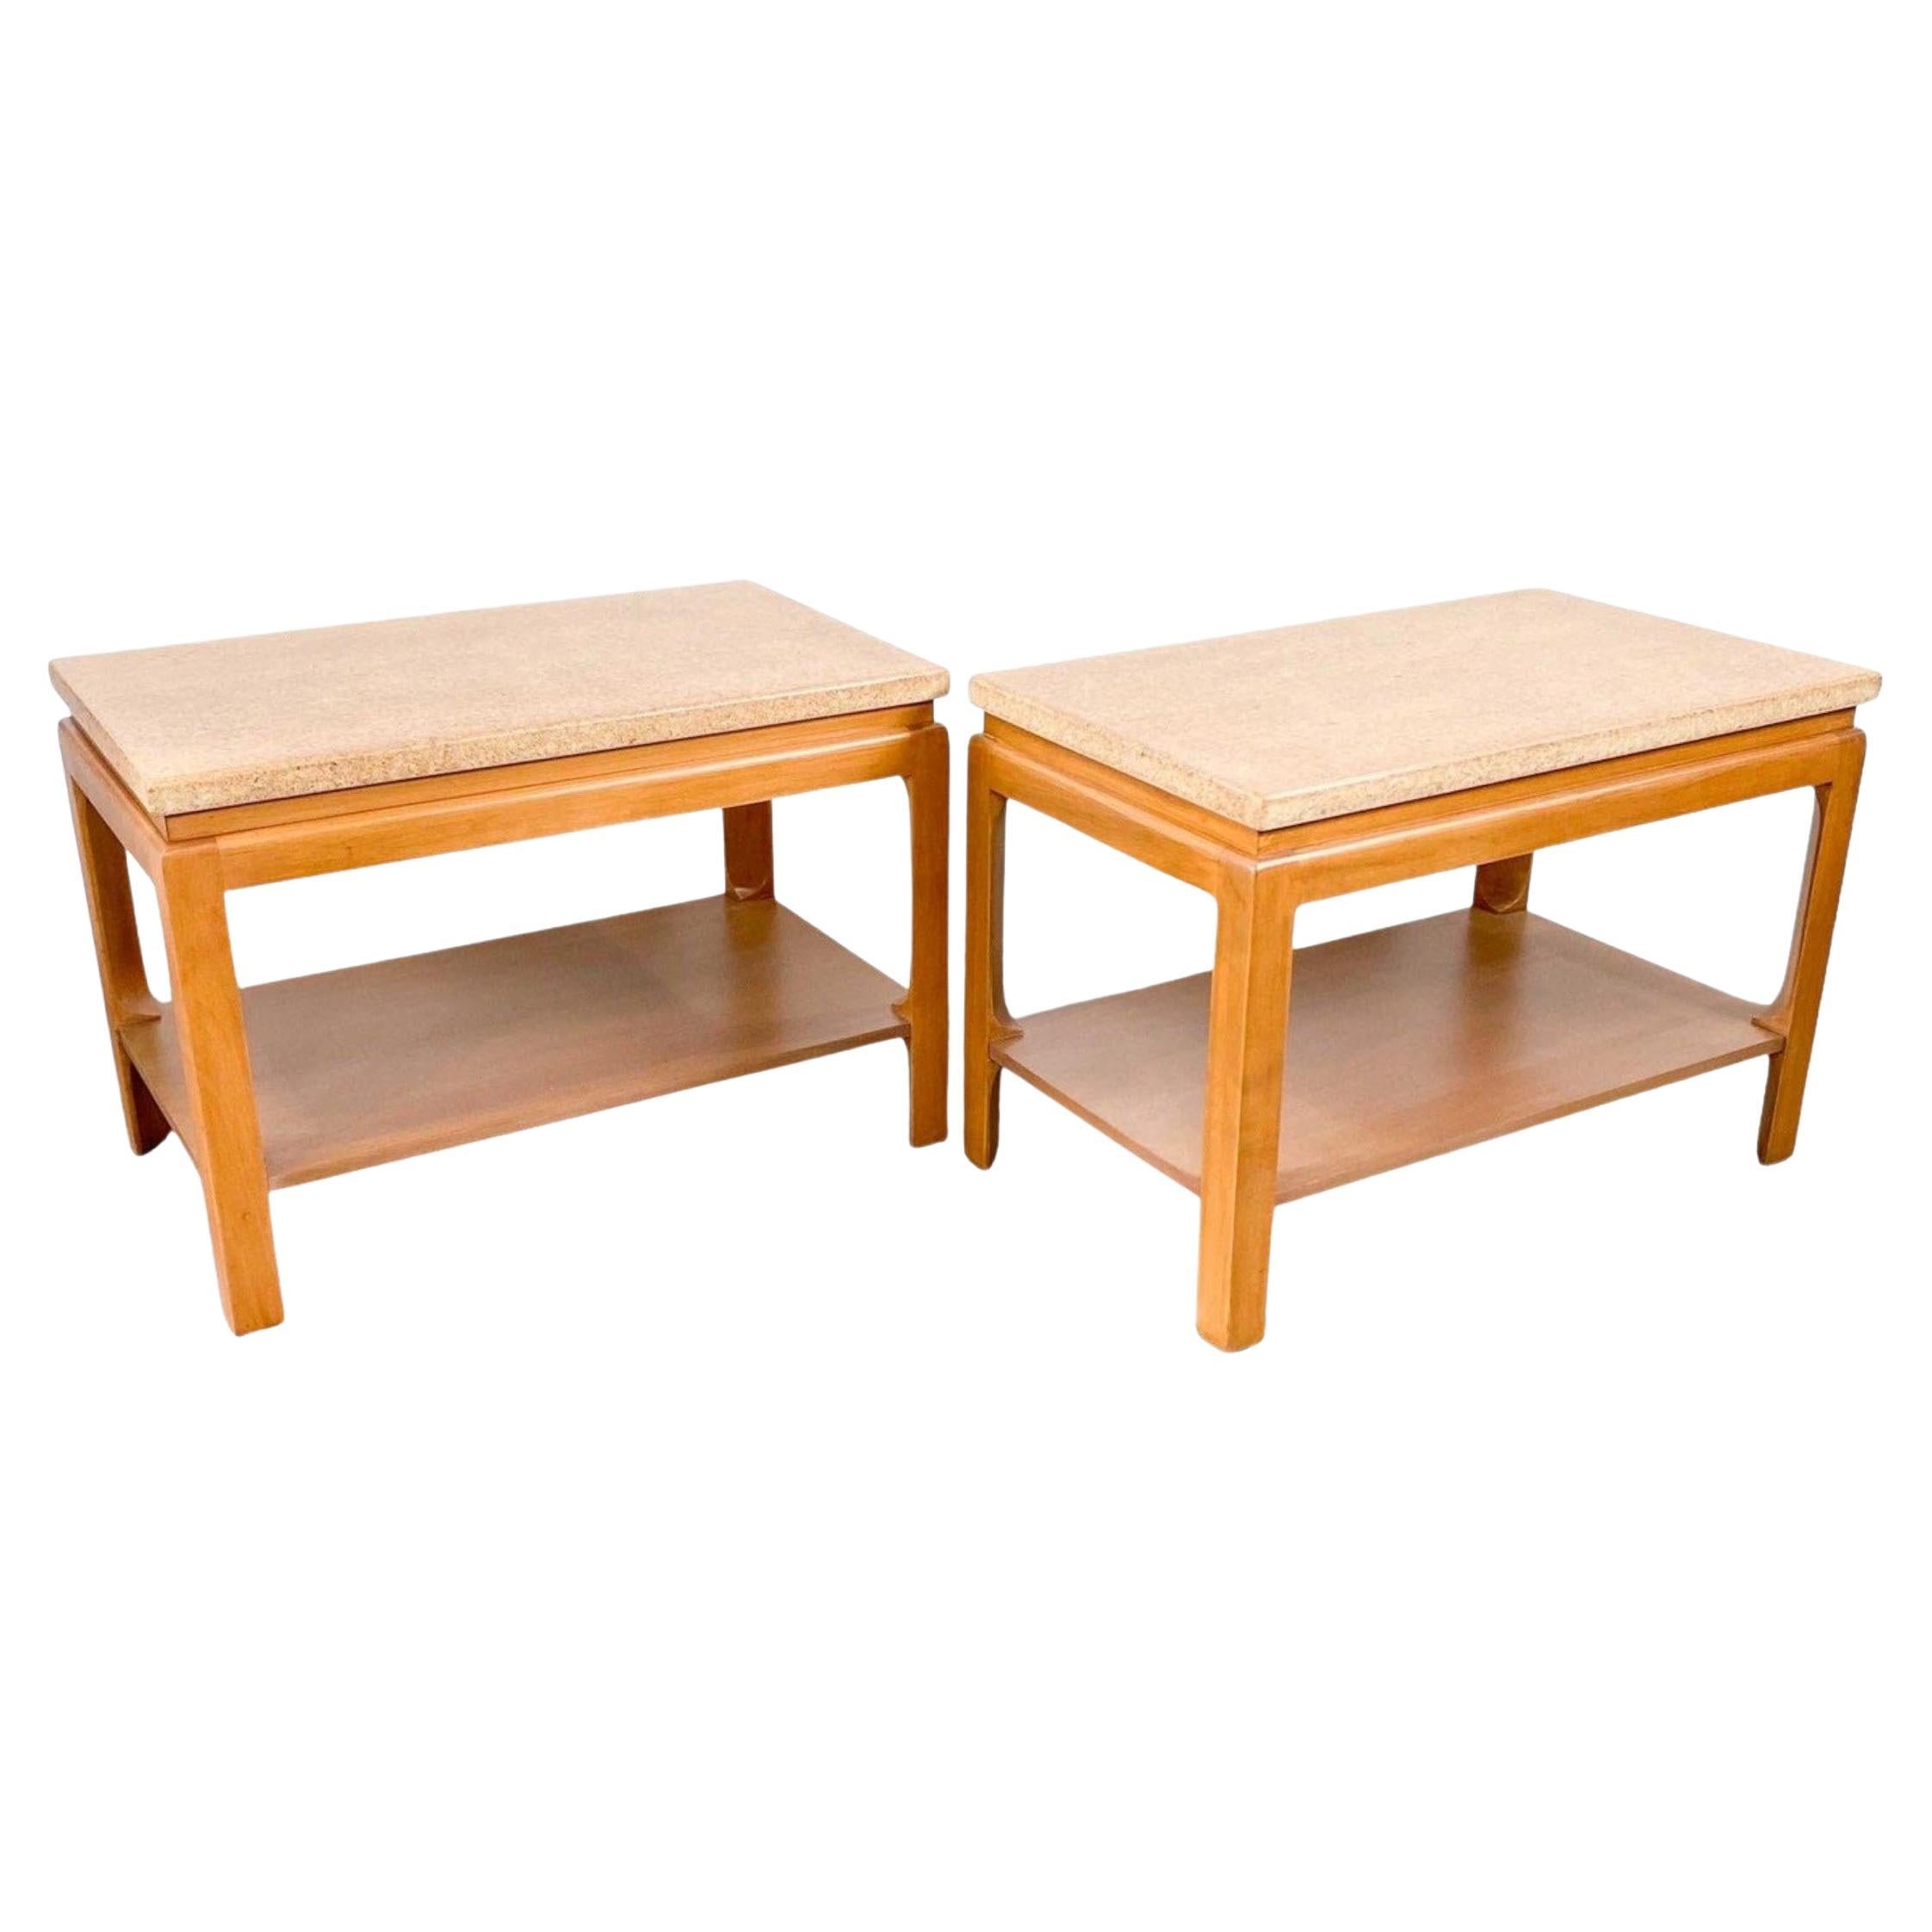 Pair of Paul T. Frankl for Johnson Cork Top Two Tier Side or End Tables, 1950s For Sale